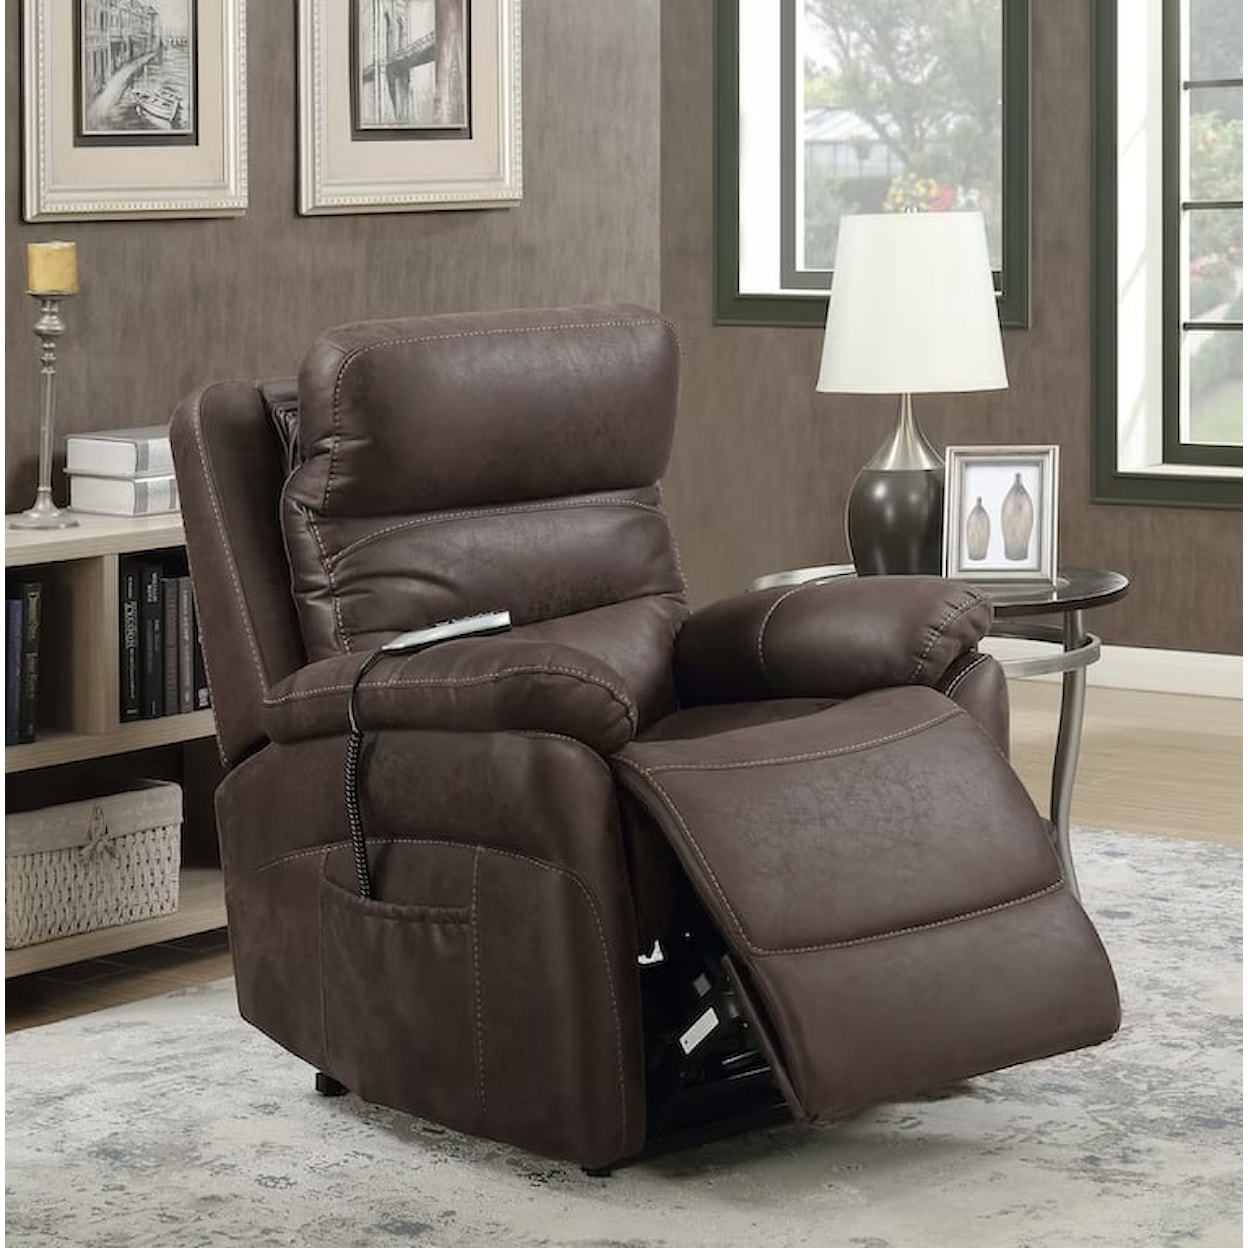 Prime Resources International Dalton Power Lift Chair in Whiskey